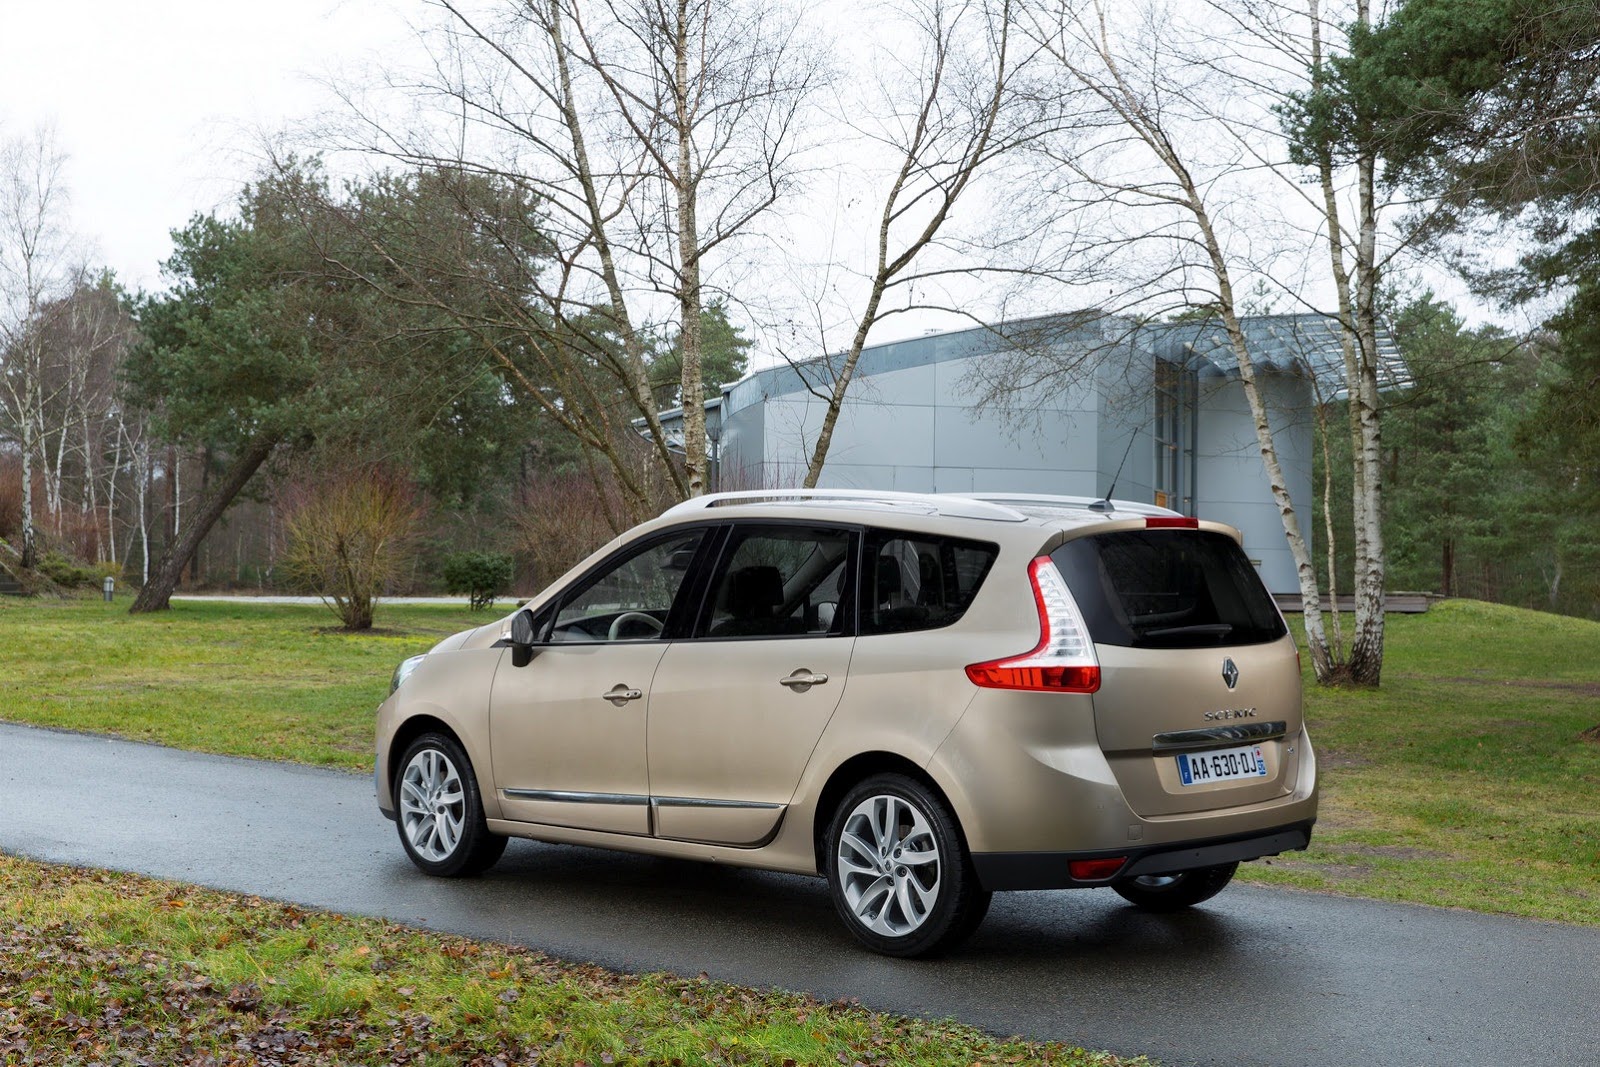 Renault Scenic and Grand Scenic MPVs Receive Second Facelift in a Year